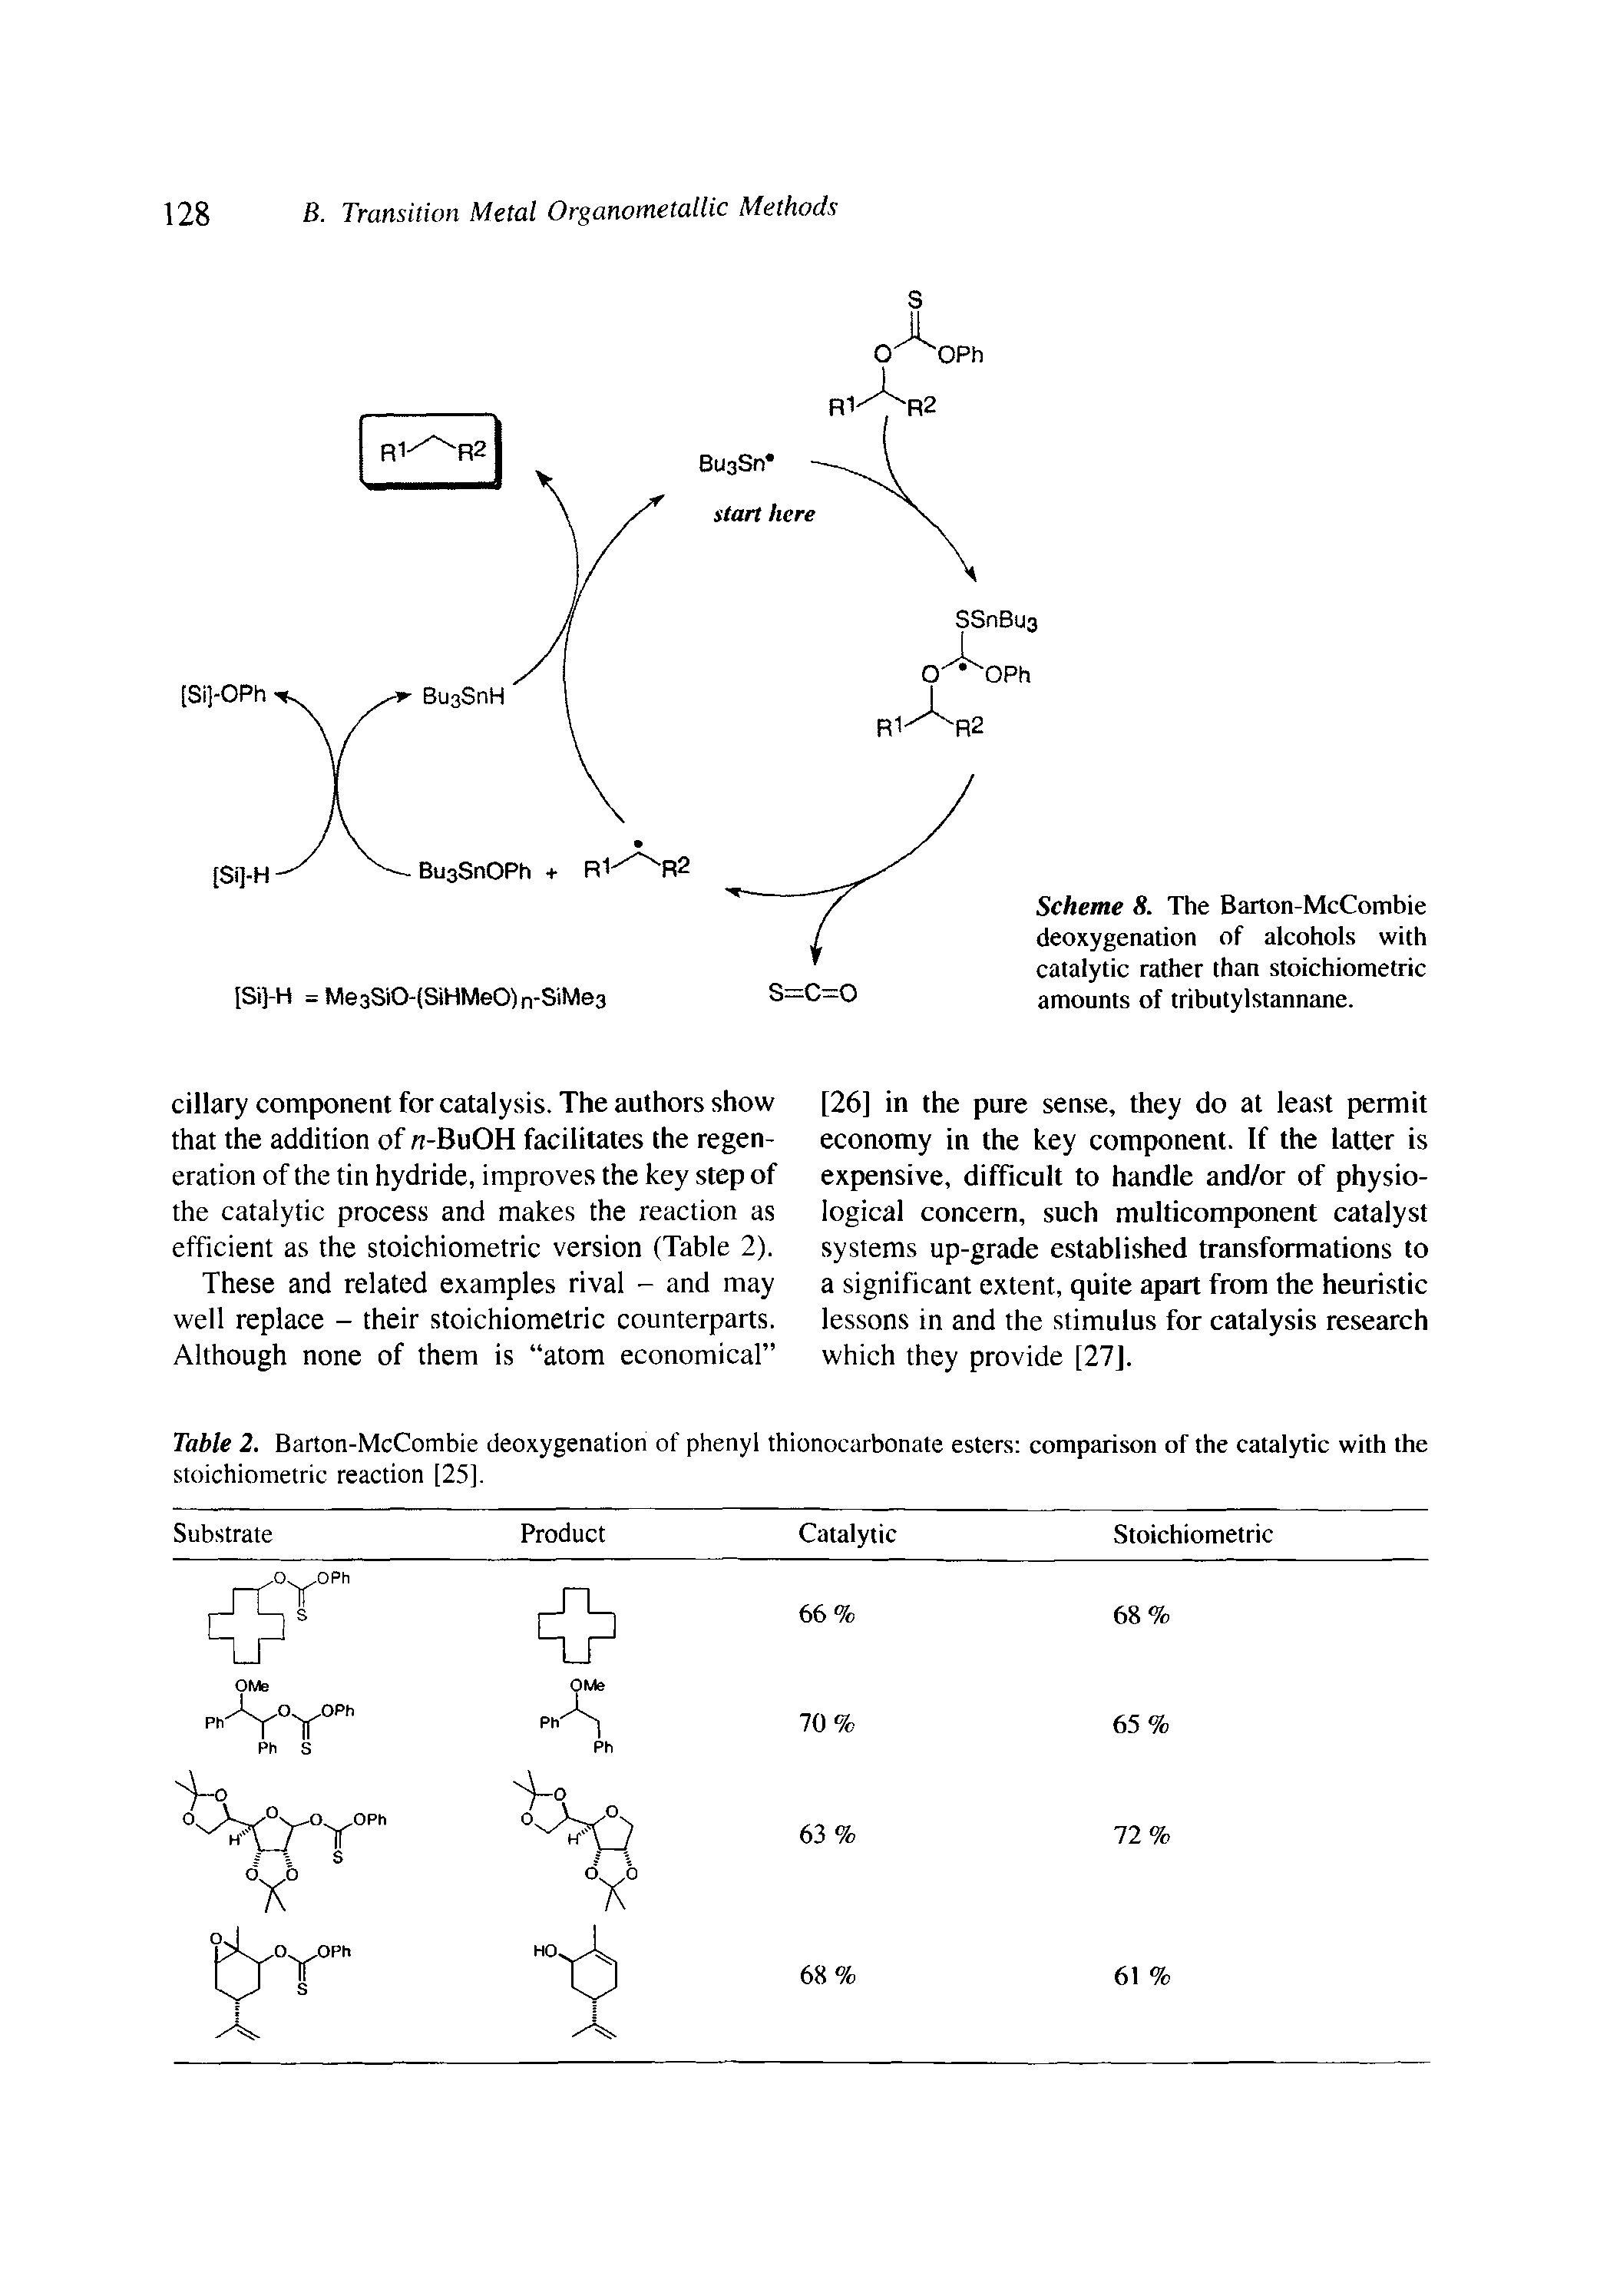 Table 2. Barton-McCombie deoxygenation of phenyl thionocarbonate esters comparison of the catalytic with the stoichiometric reaction [25].